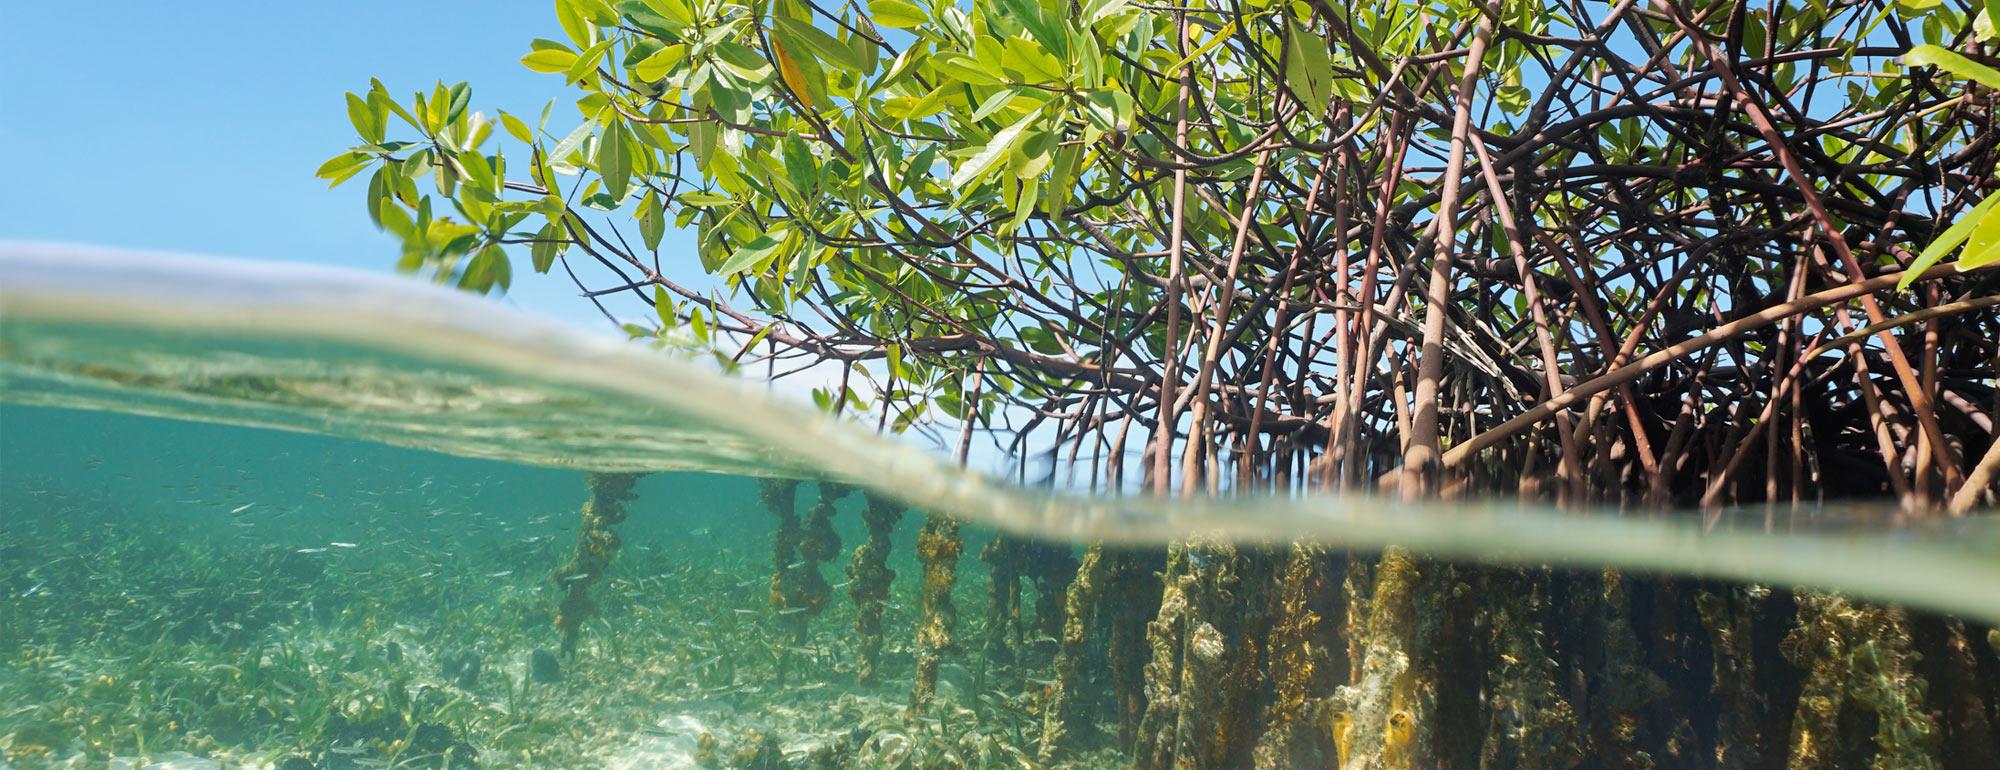 A view half underwater and above of the roots and canopy of a coastal mangrove swamp